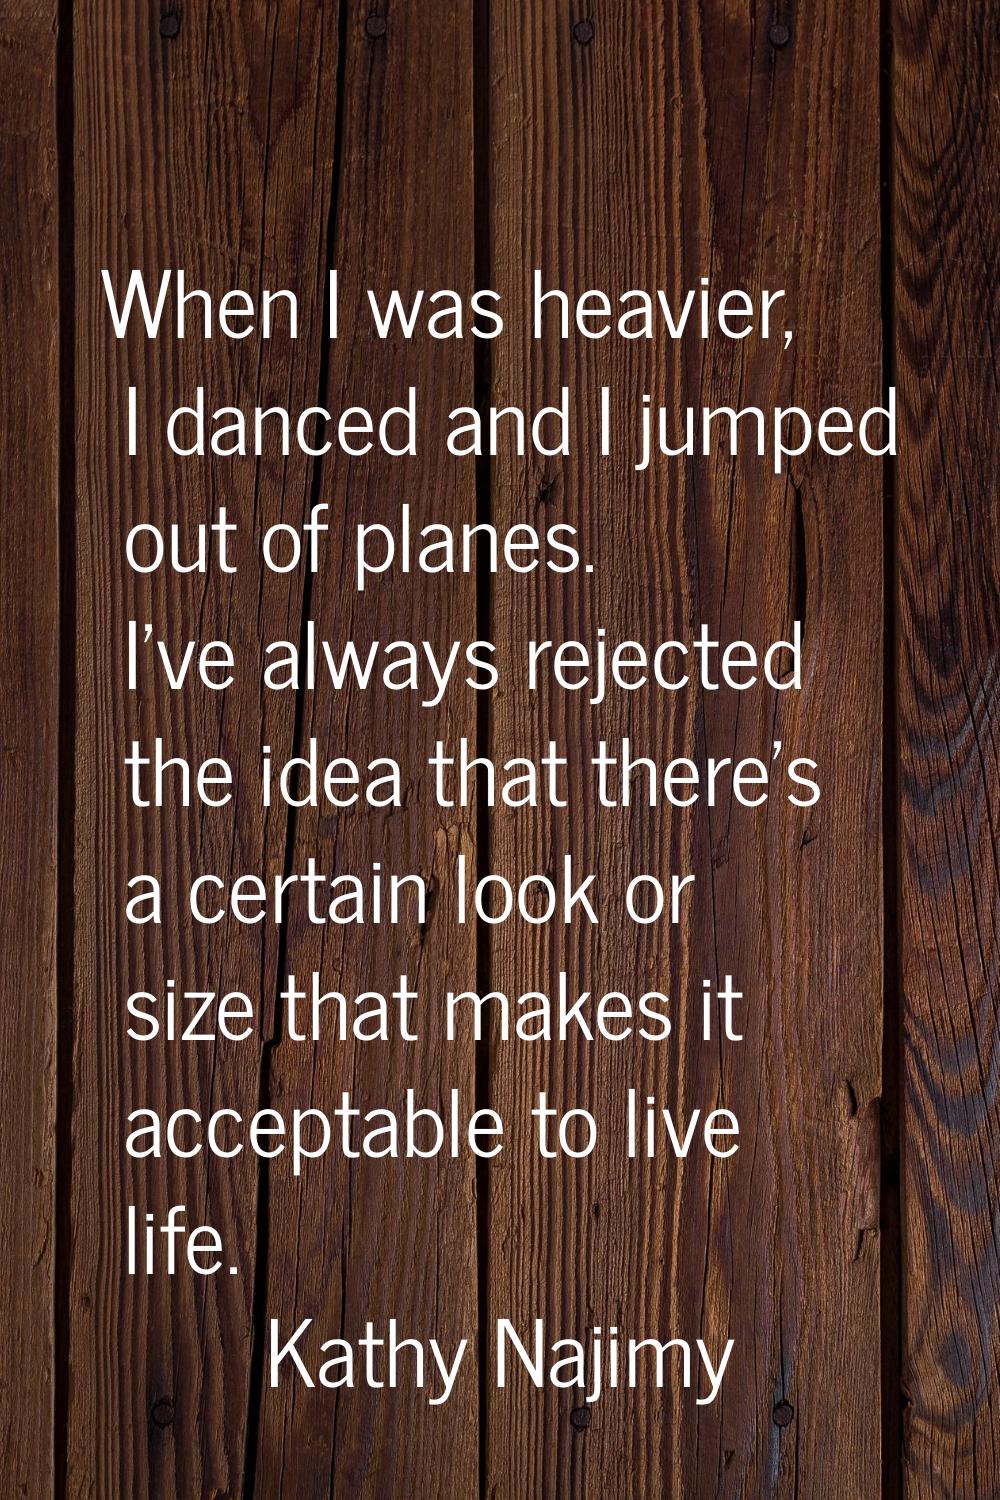 When I was heavier, I danced and I jumped out of planes. I've always rejected the idea that there's